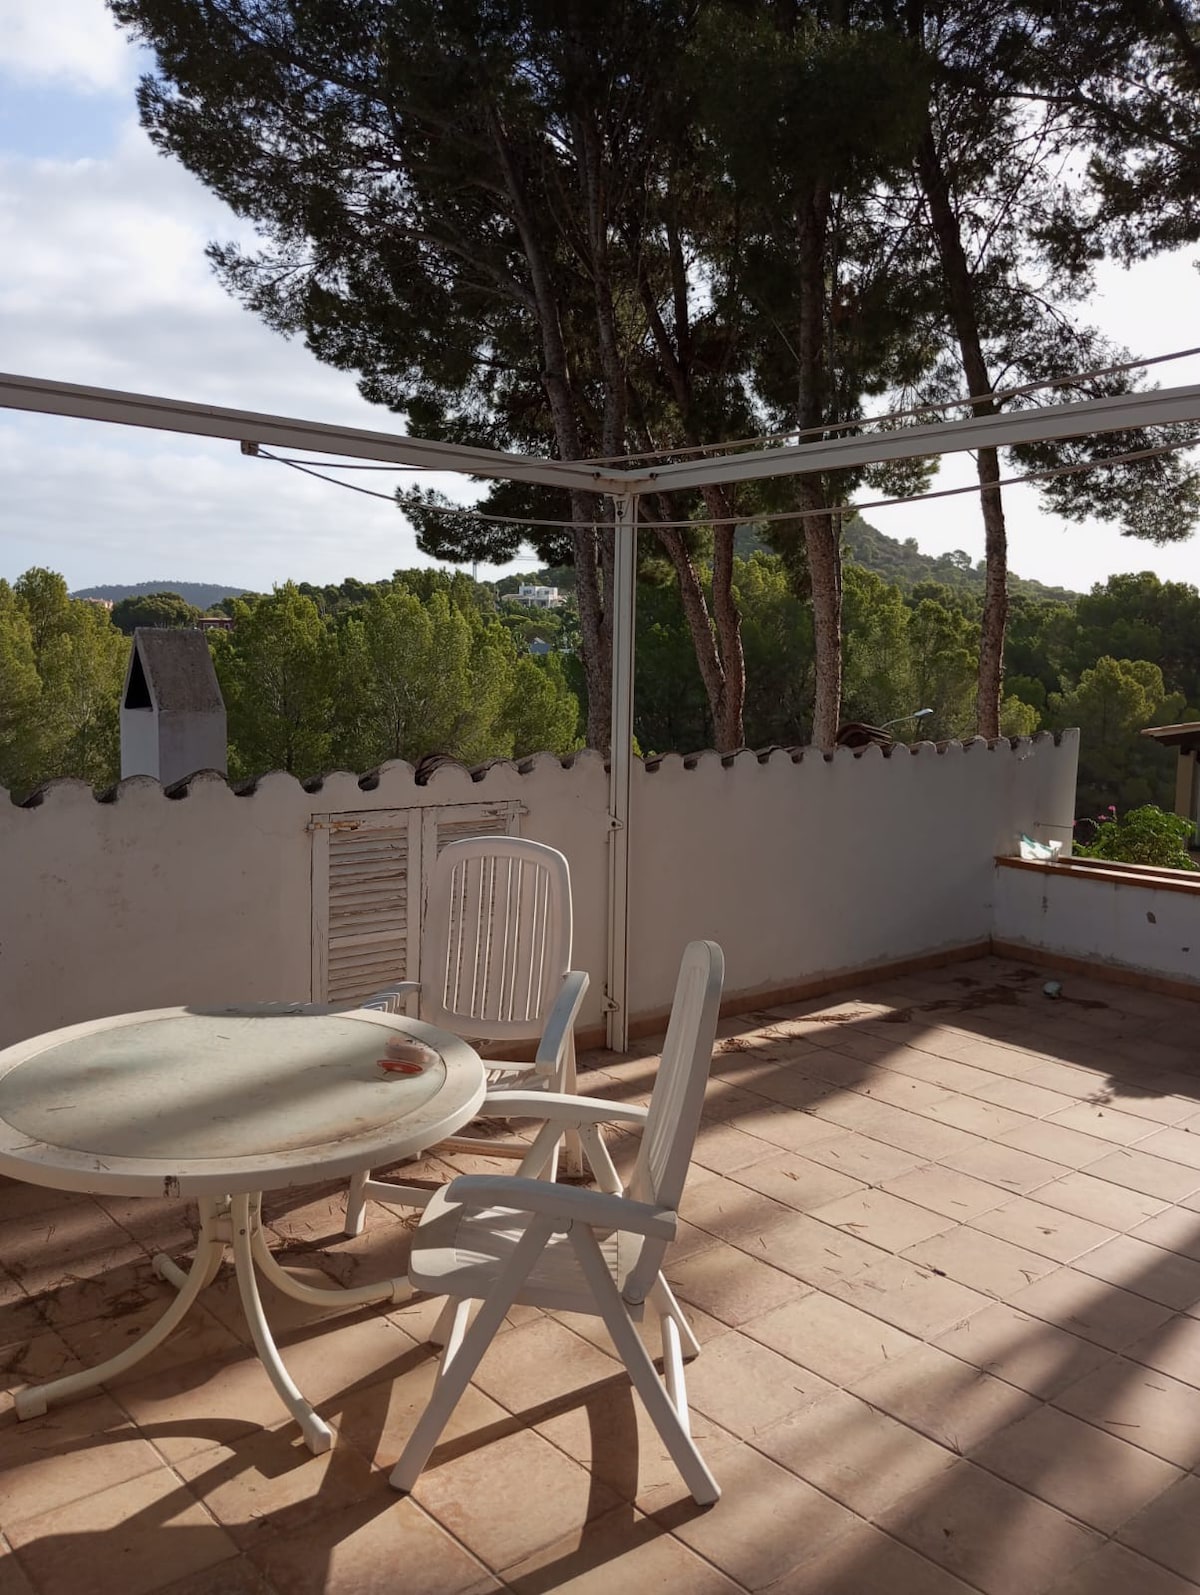 2 bedroom house a stone's throw from the beach.